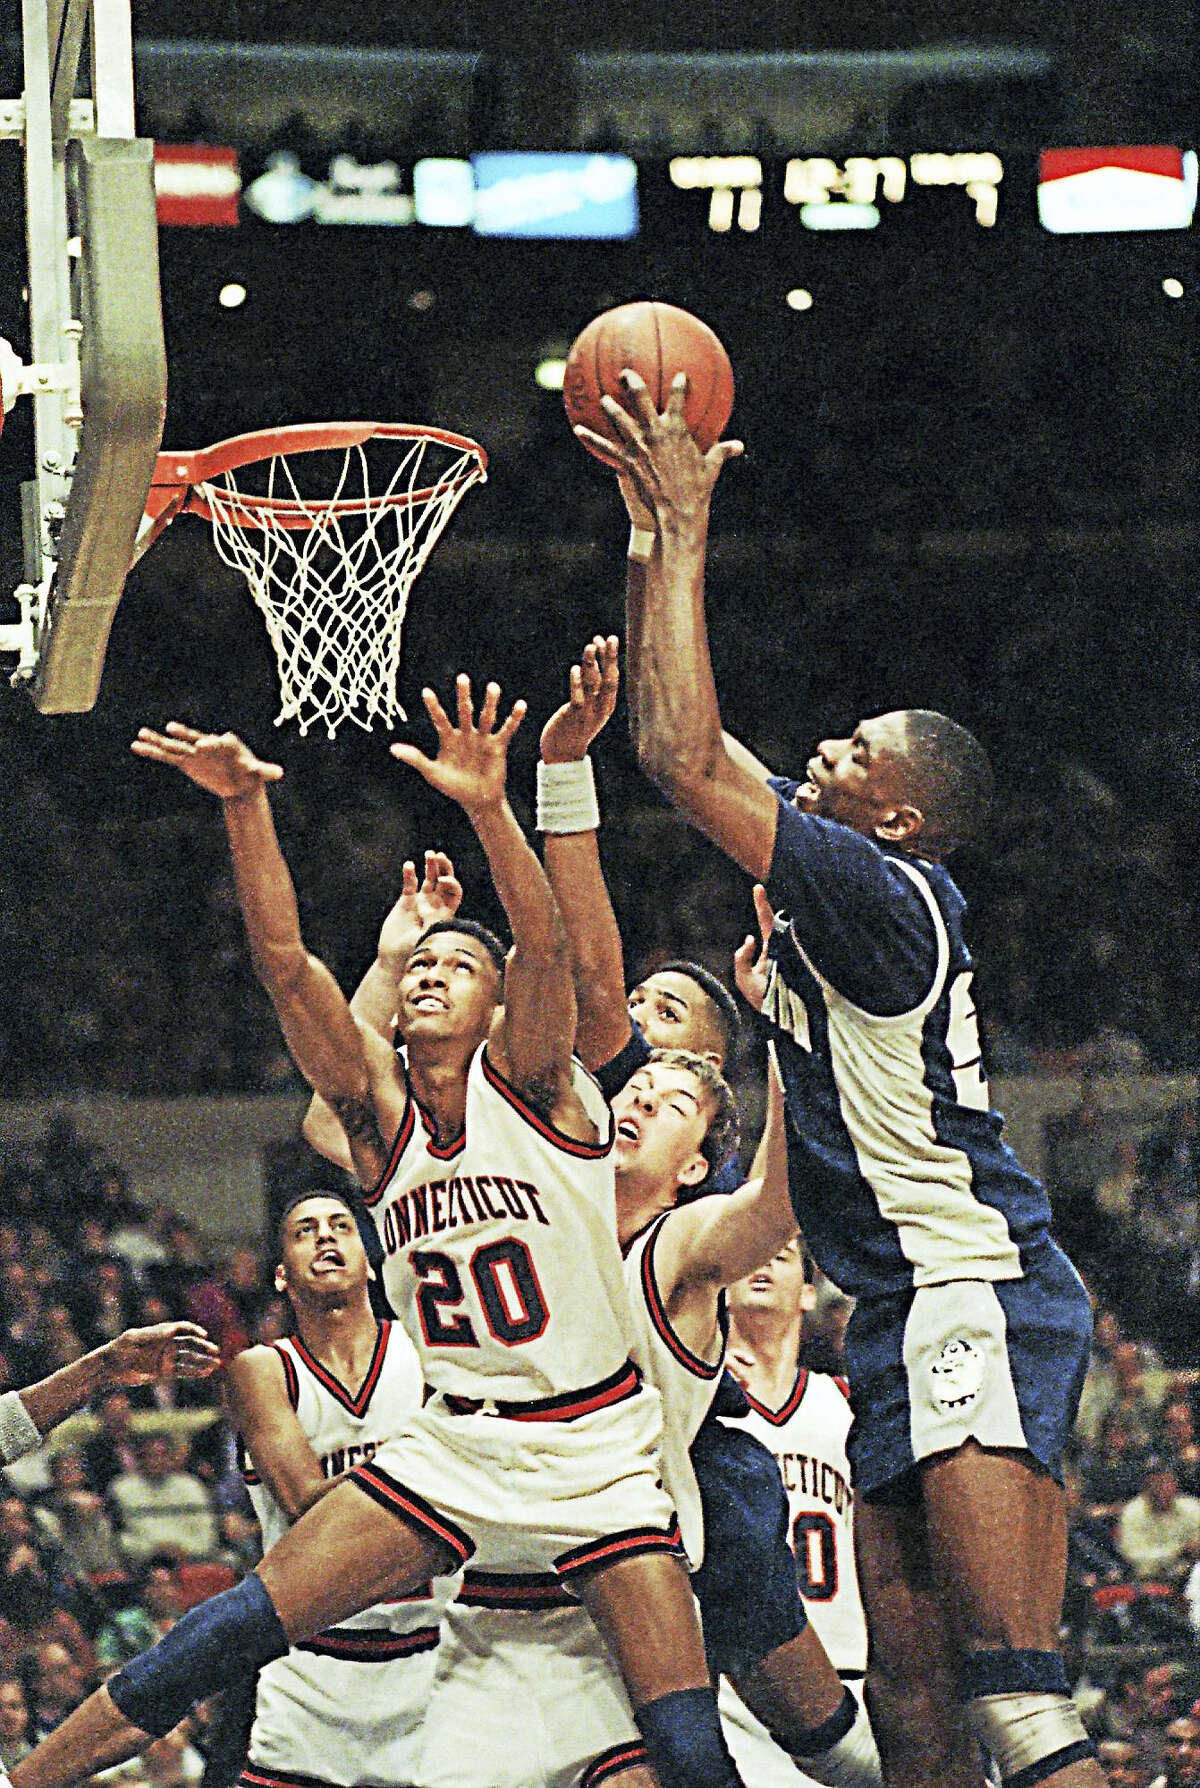 UConn’s Murray Williams (20) tries in vain to thwart the shot of Georgetown’s Dikembe Mutombo during te Big East tournament in New York on March 10, 1990. The Huskies won that game 65-60.